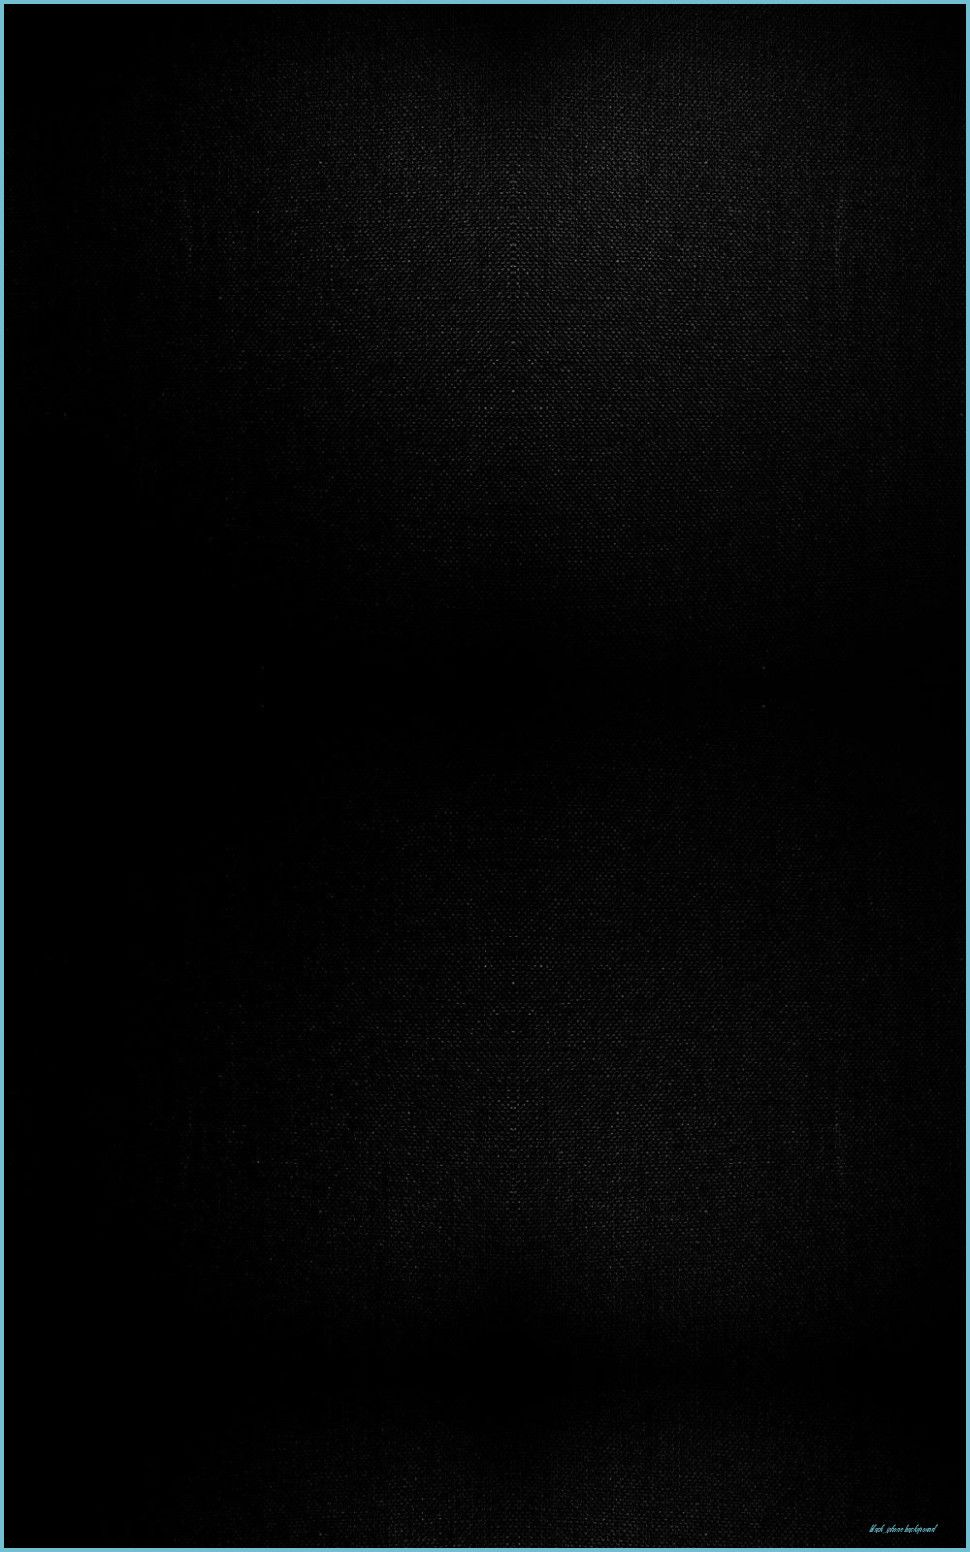 Solid Black iPhone Wallpaper Free Solid Black iPhone iphone background